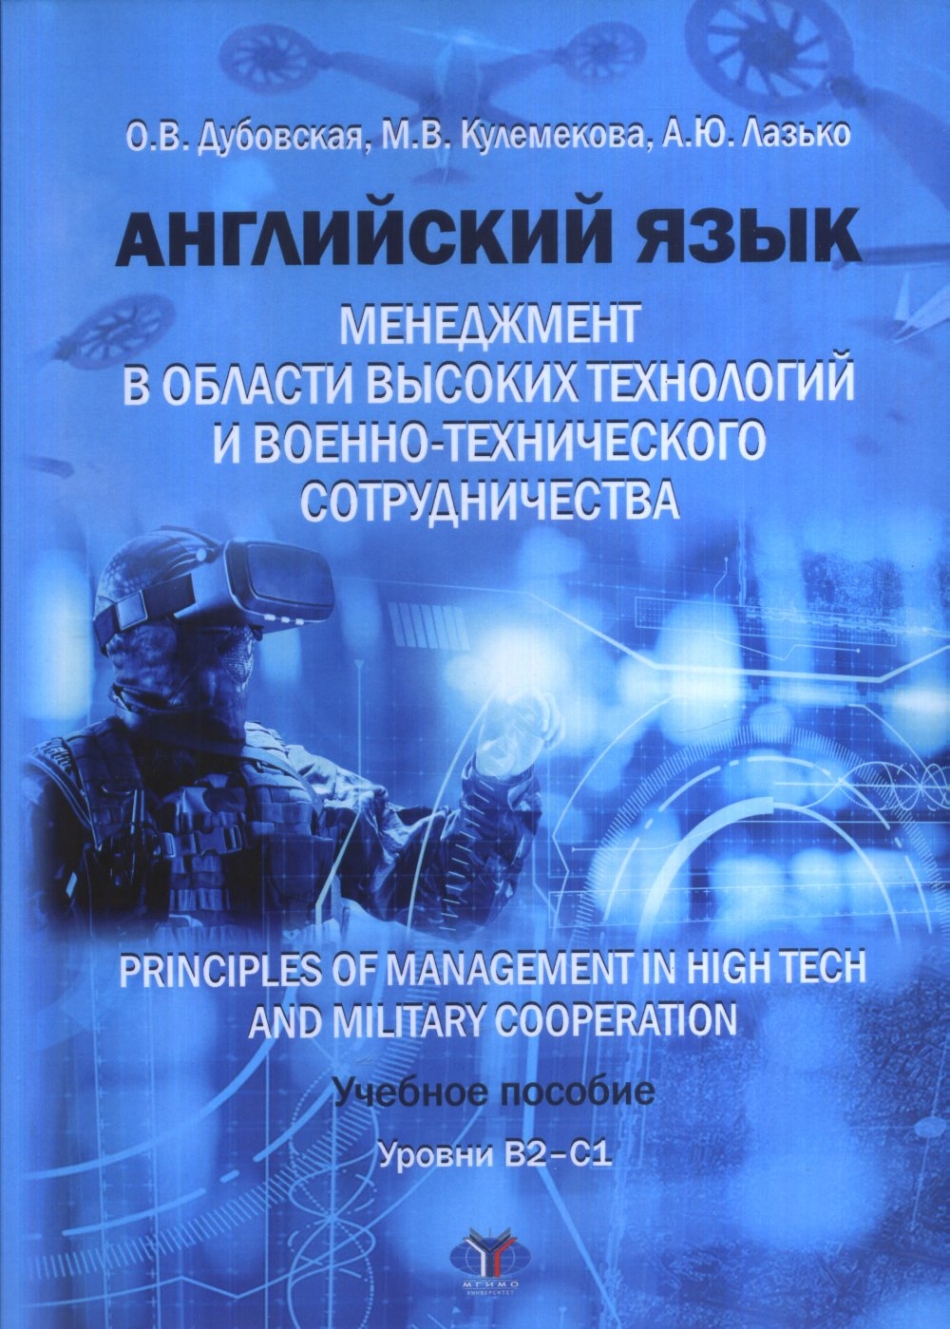  ..,  ..,  ..  .       -  / Principles of  Management in High Tech and Military Cooperation.  2-1 